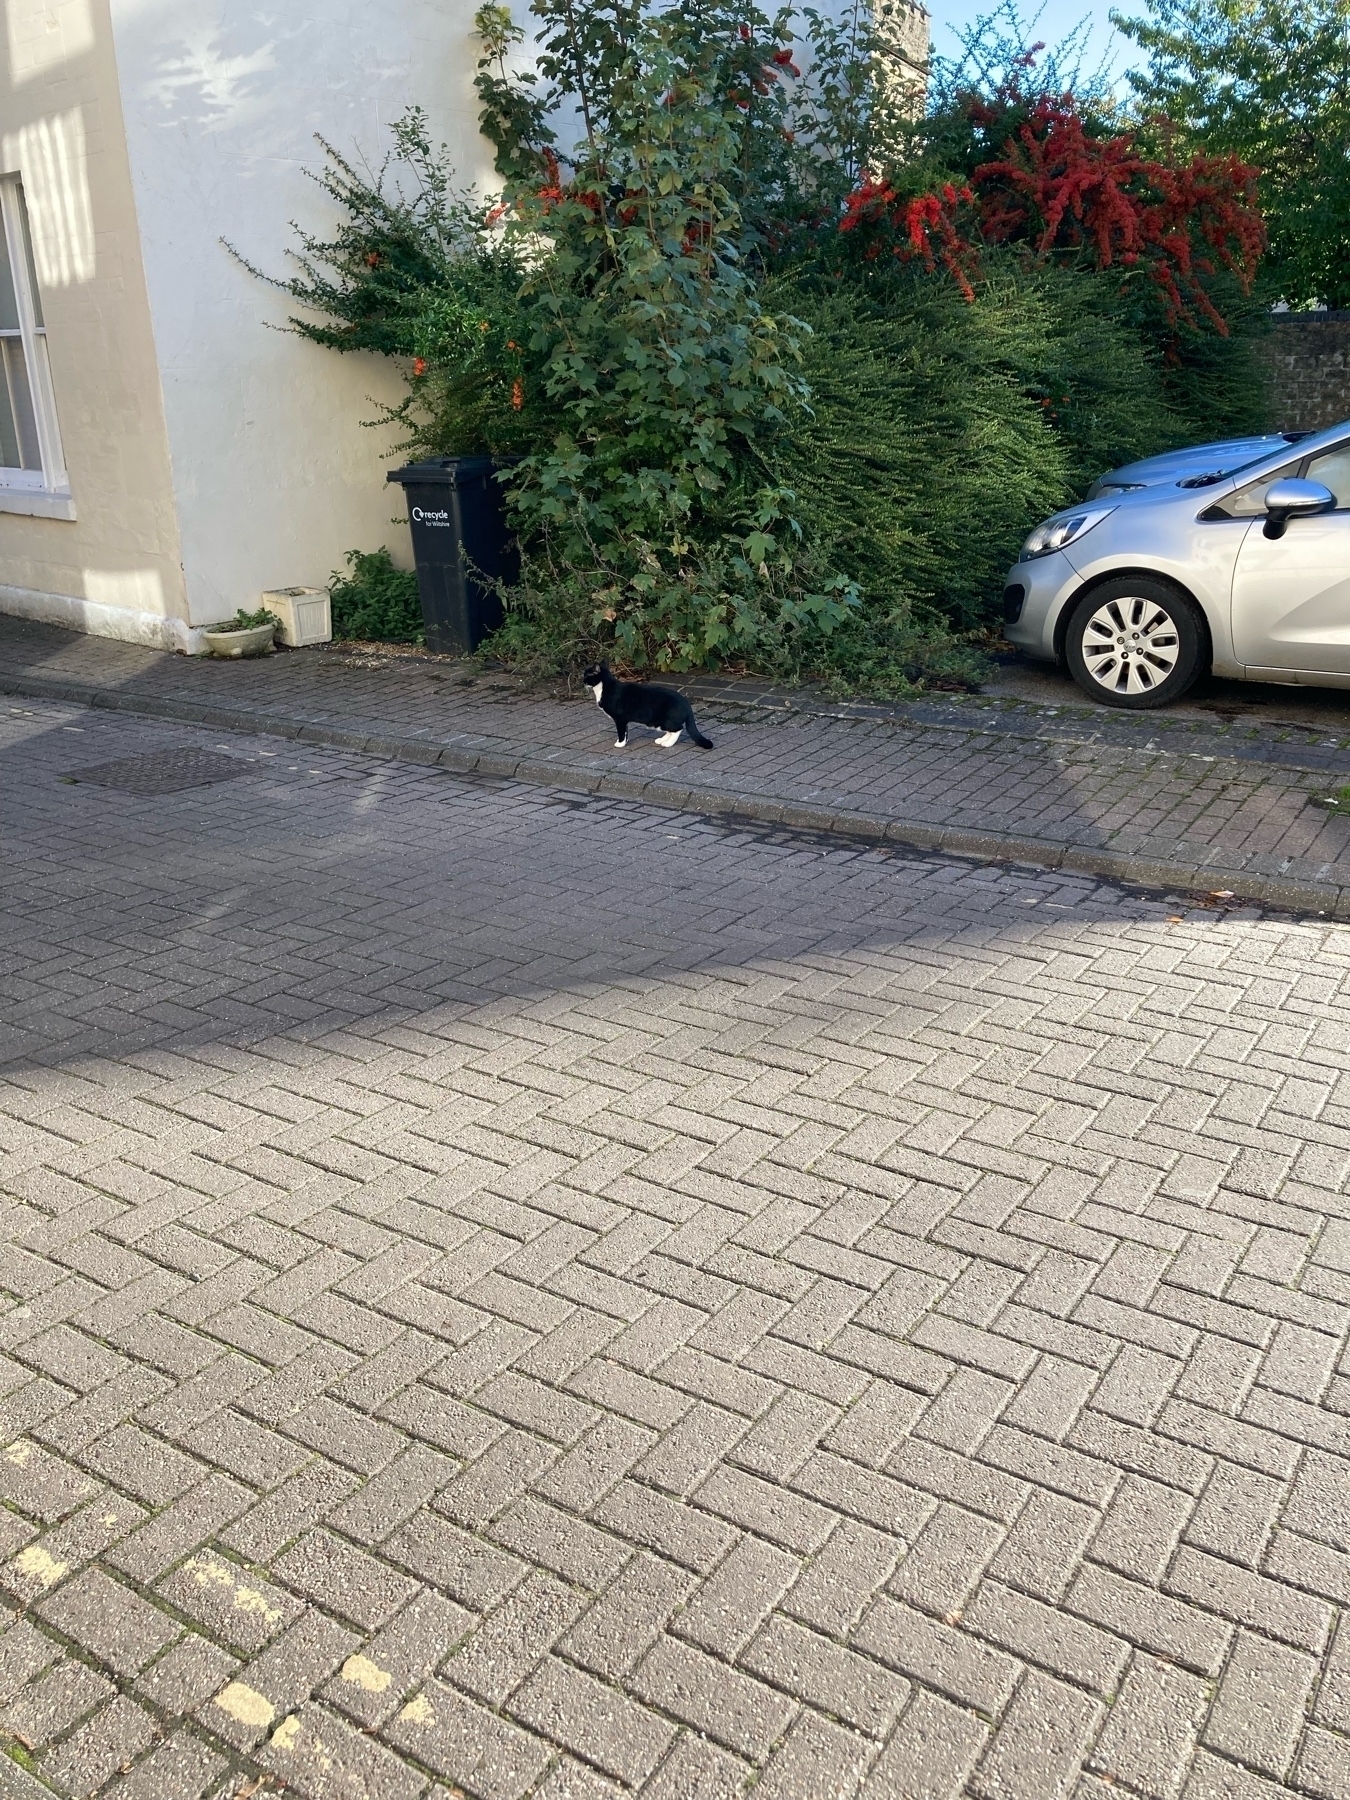 A black and white cat standing alert in the street.